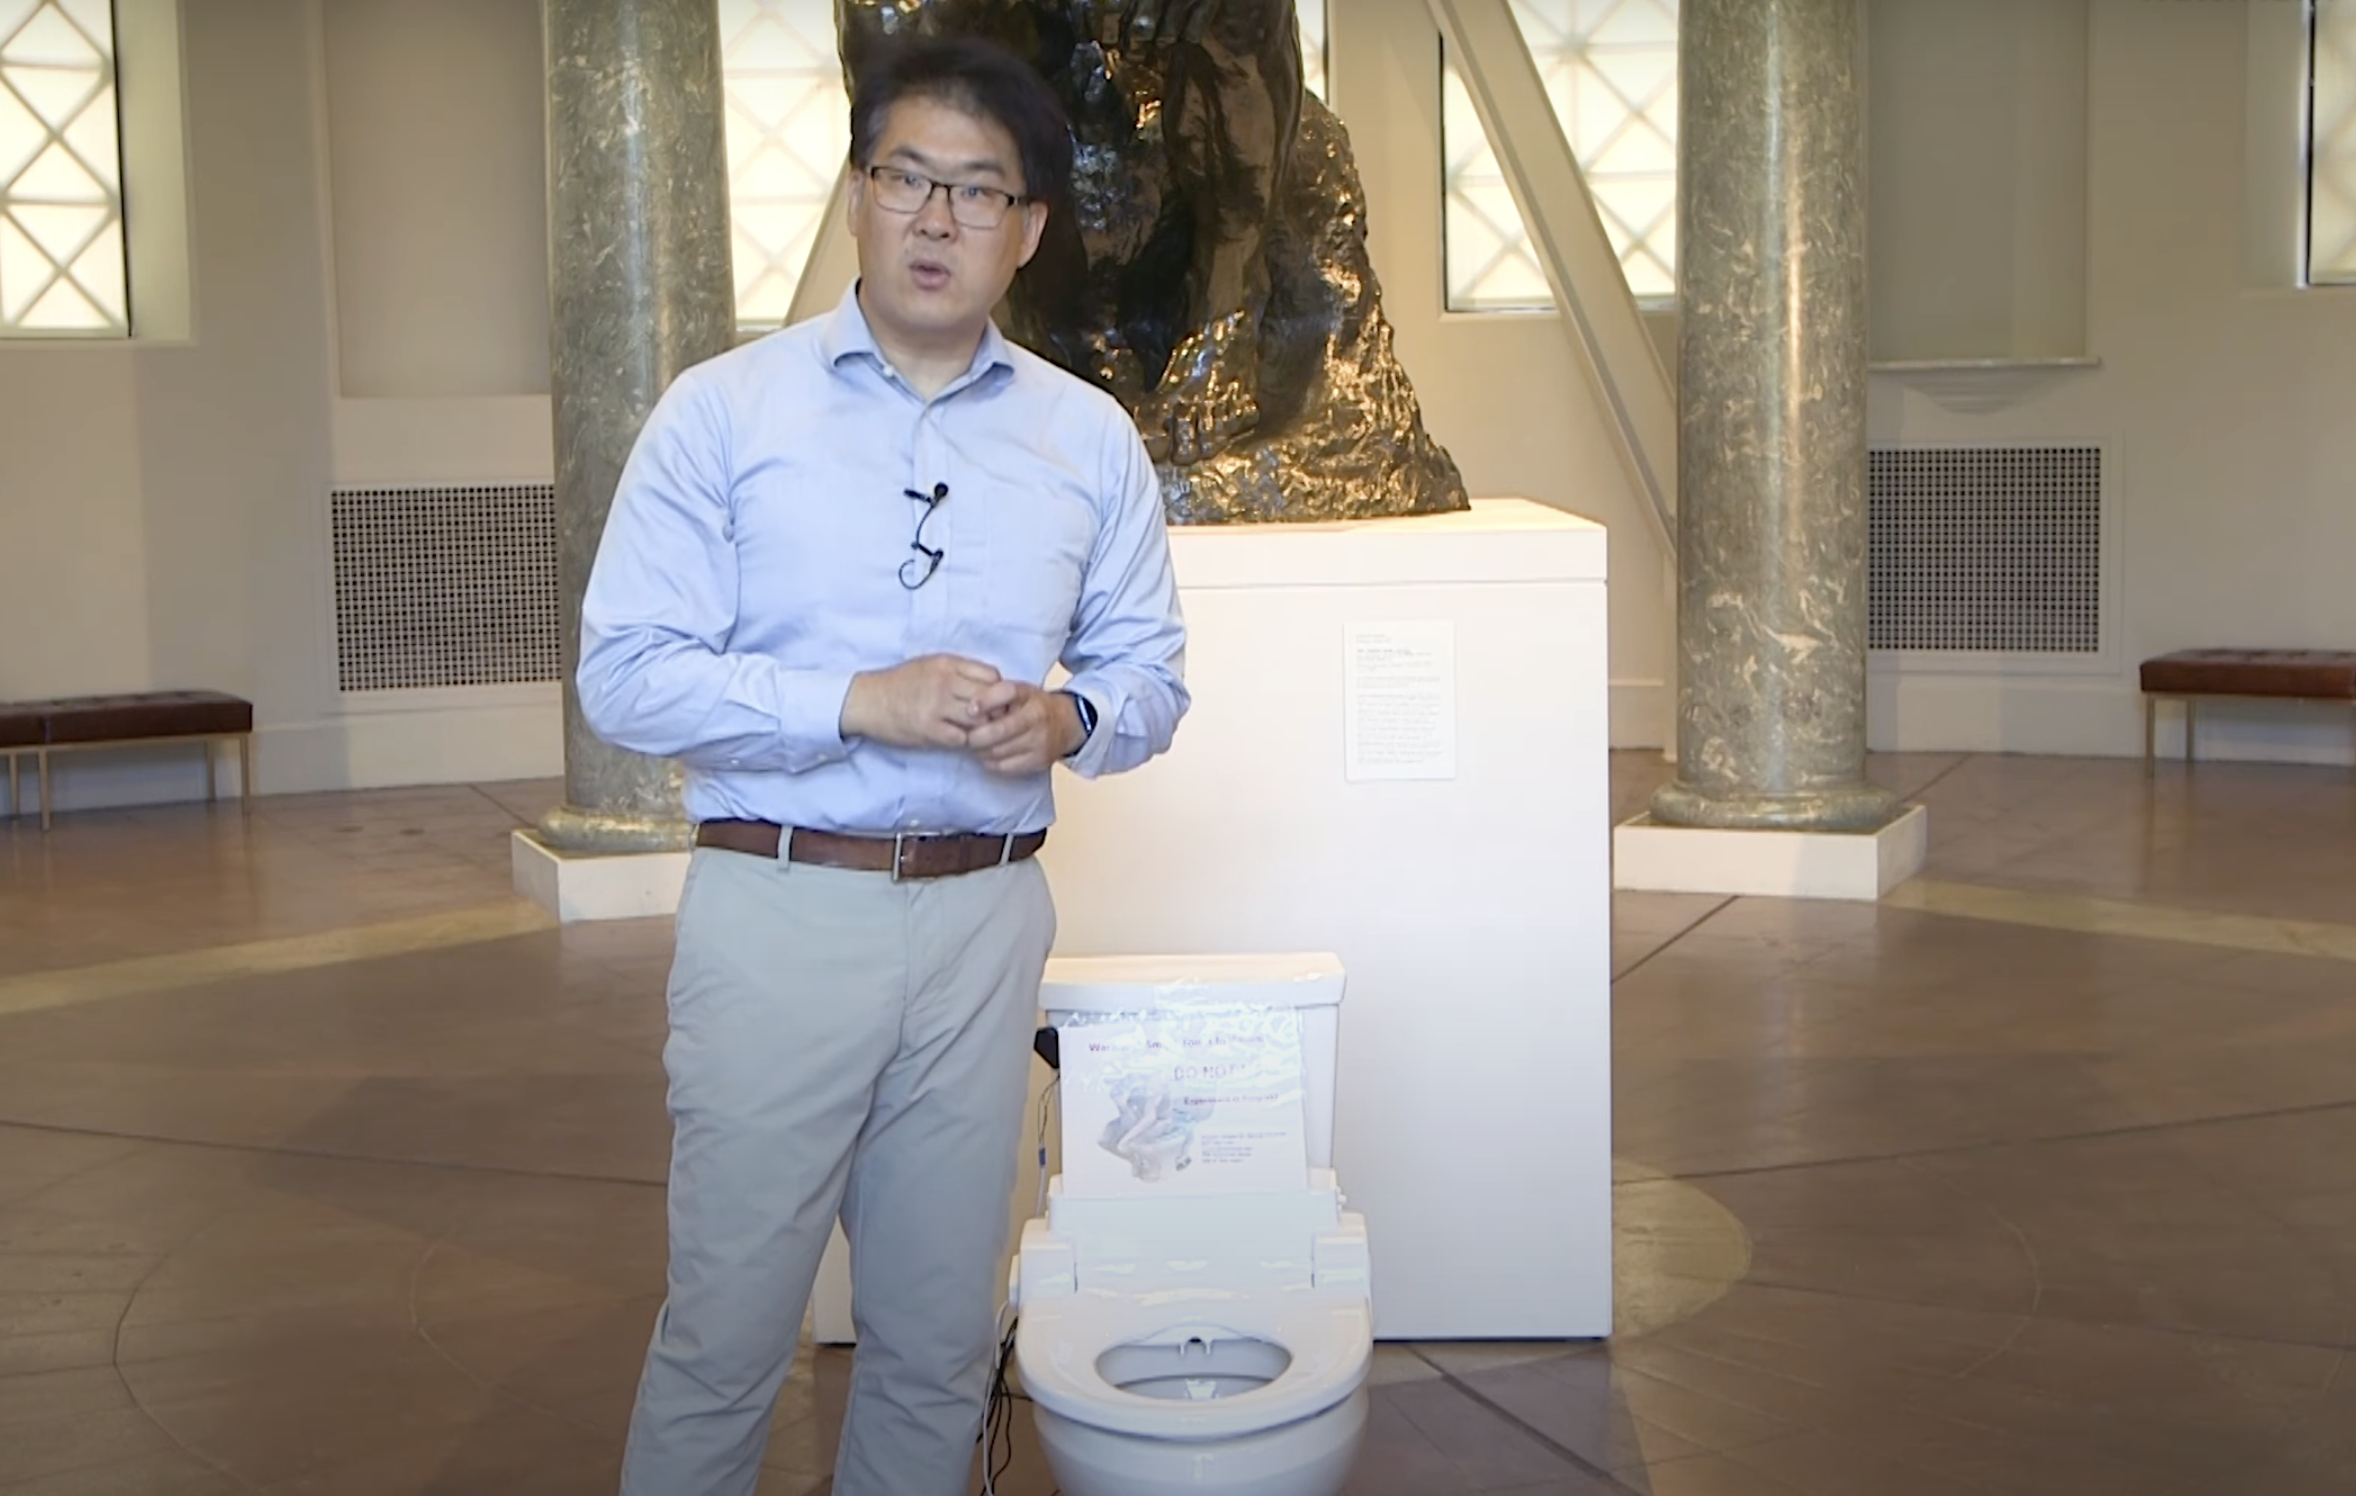 Seung-min Park invented a smart toilet to analyse human waste. /improbable.com